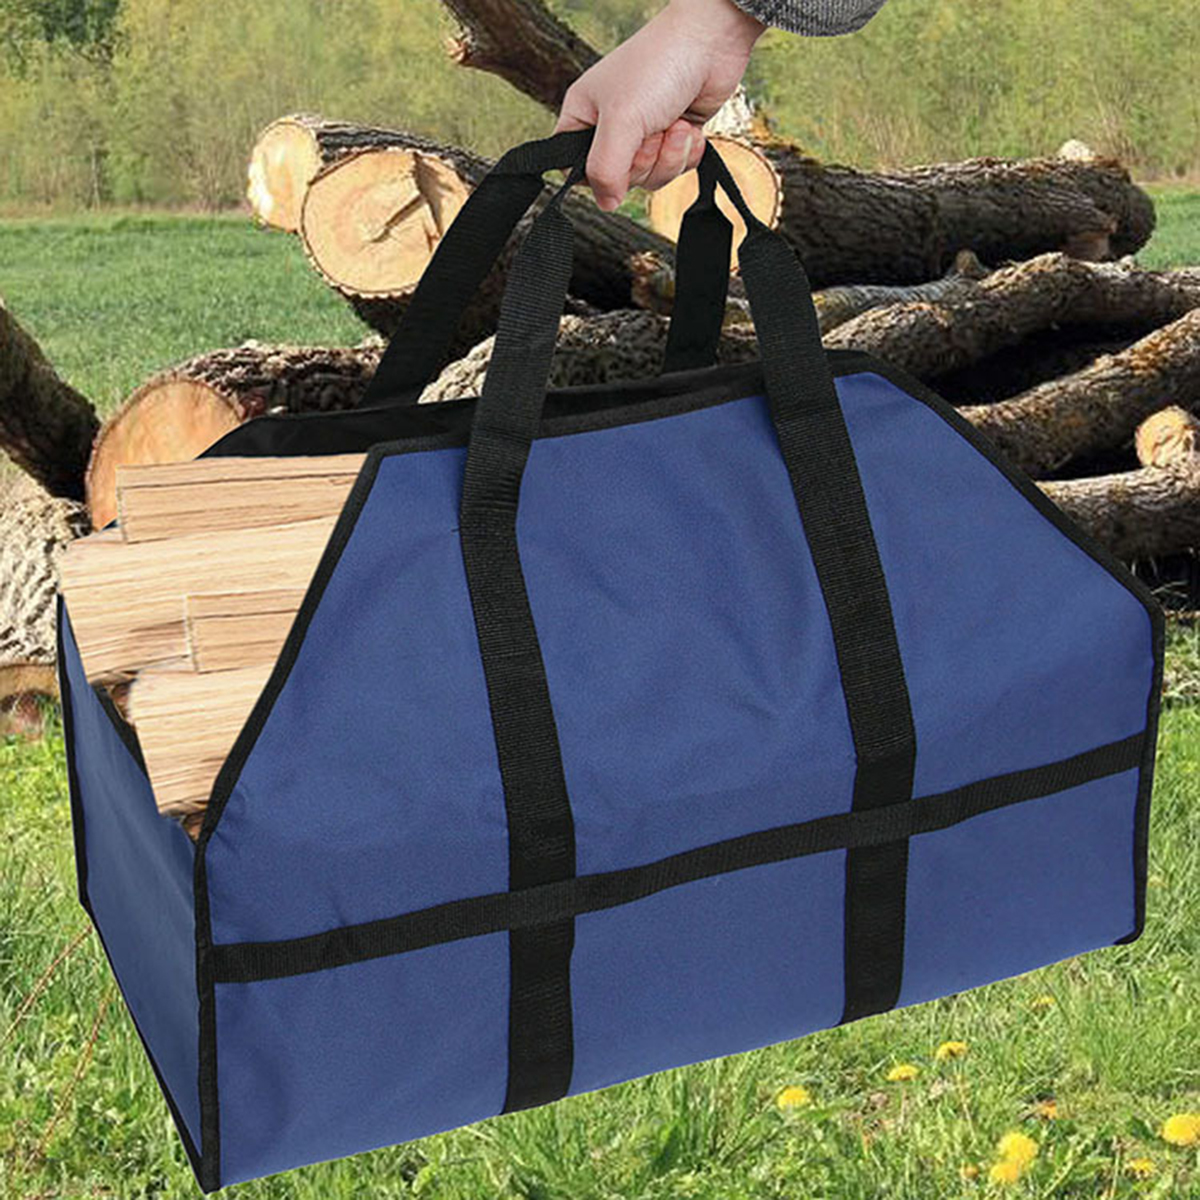 210D-Oxford-Cloth-Firewood-Carrier-Bag-Wood-Holder-Storage-Bag-Tote-Organizer-Outdoor-Camping-Picnic-1764243-9